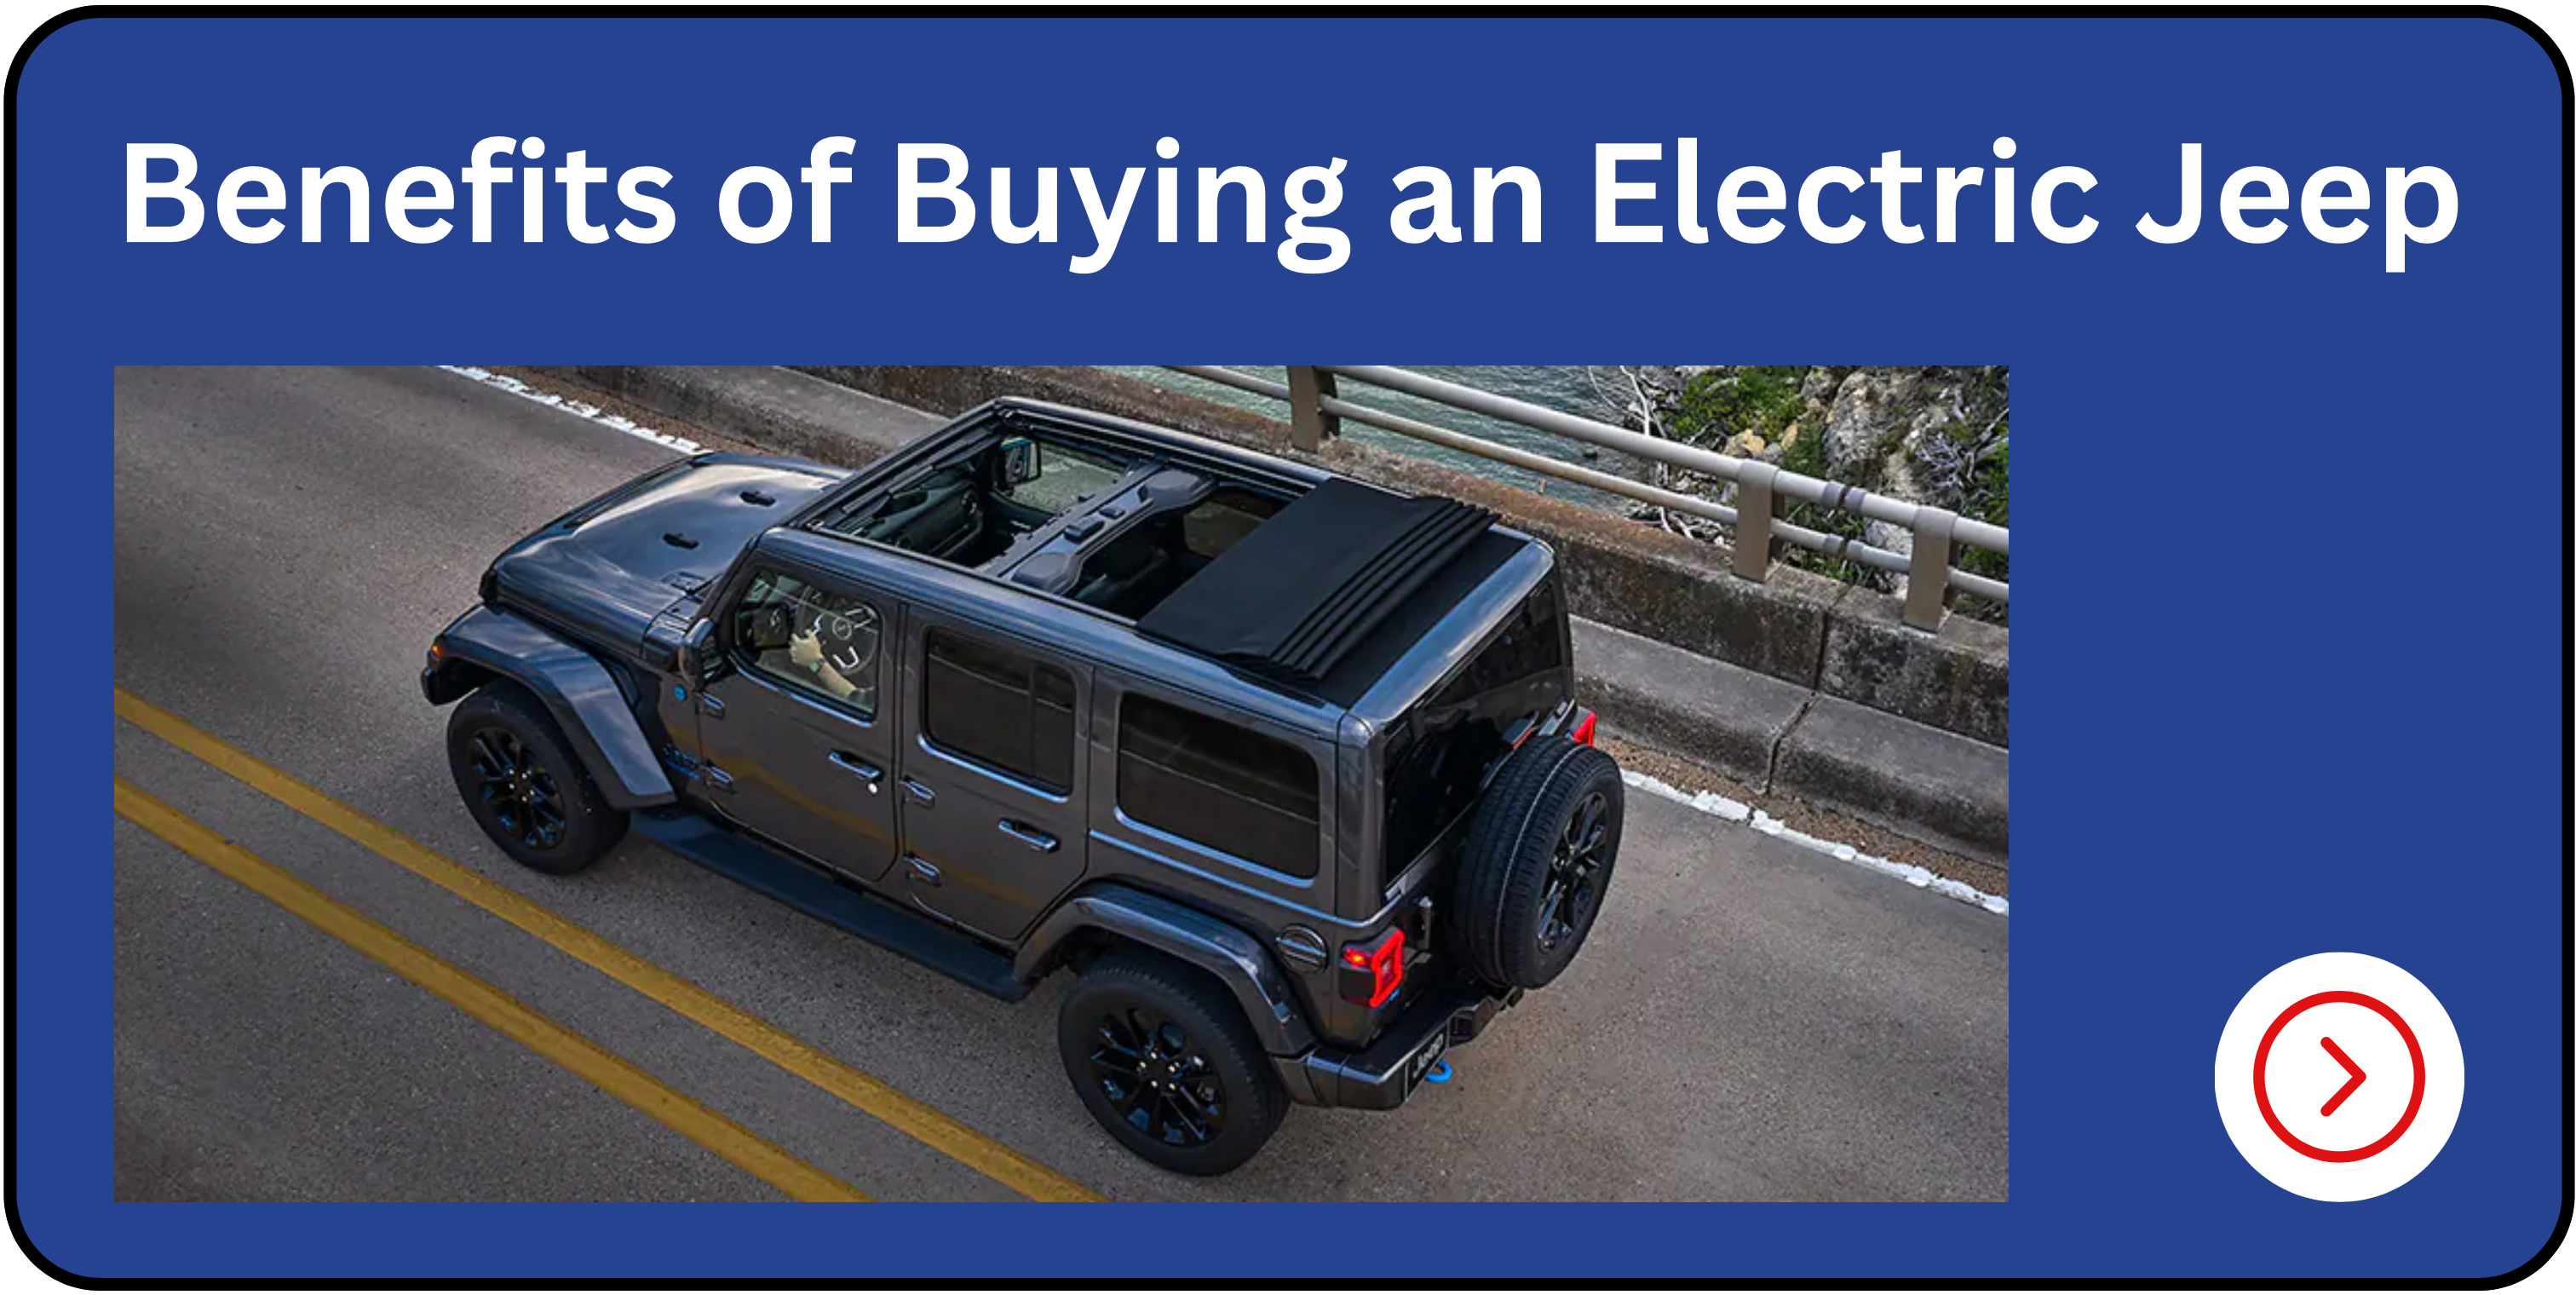 Benefits of Buying an Electric Jeep